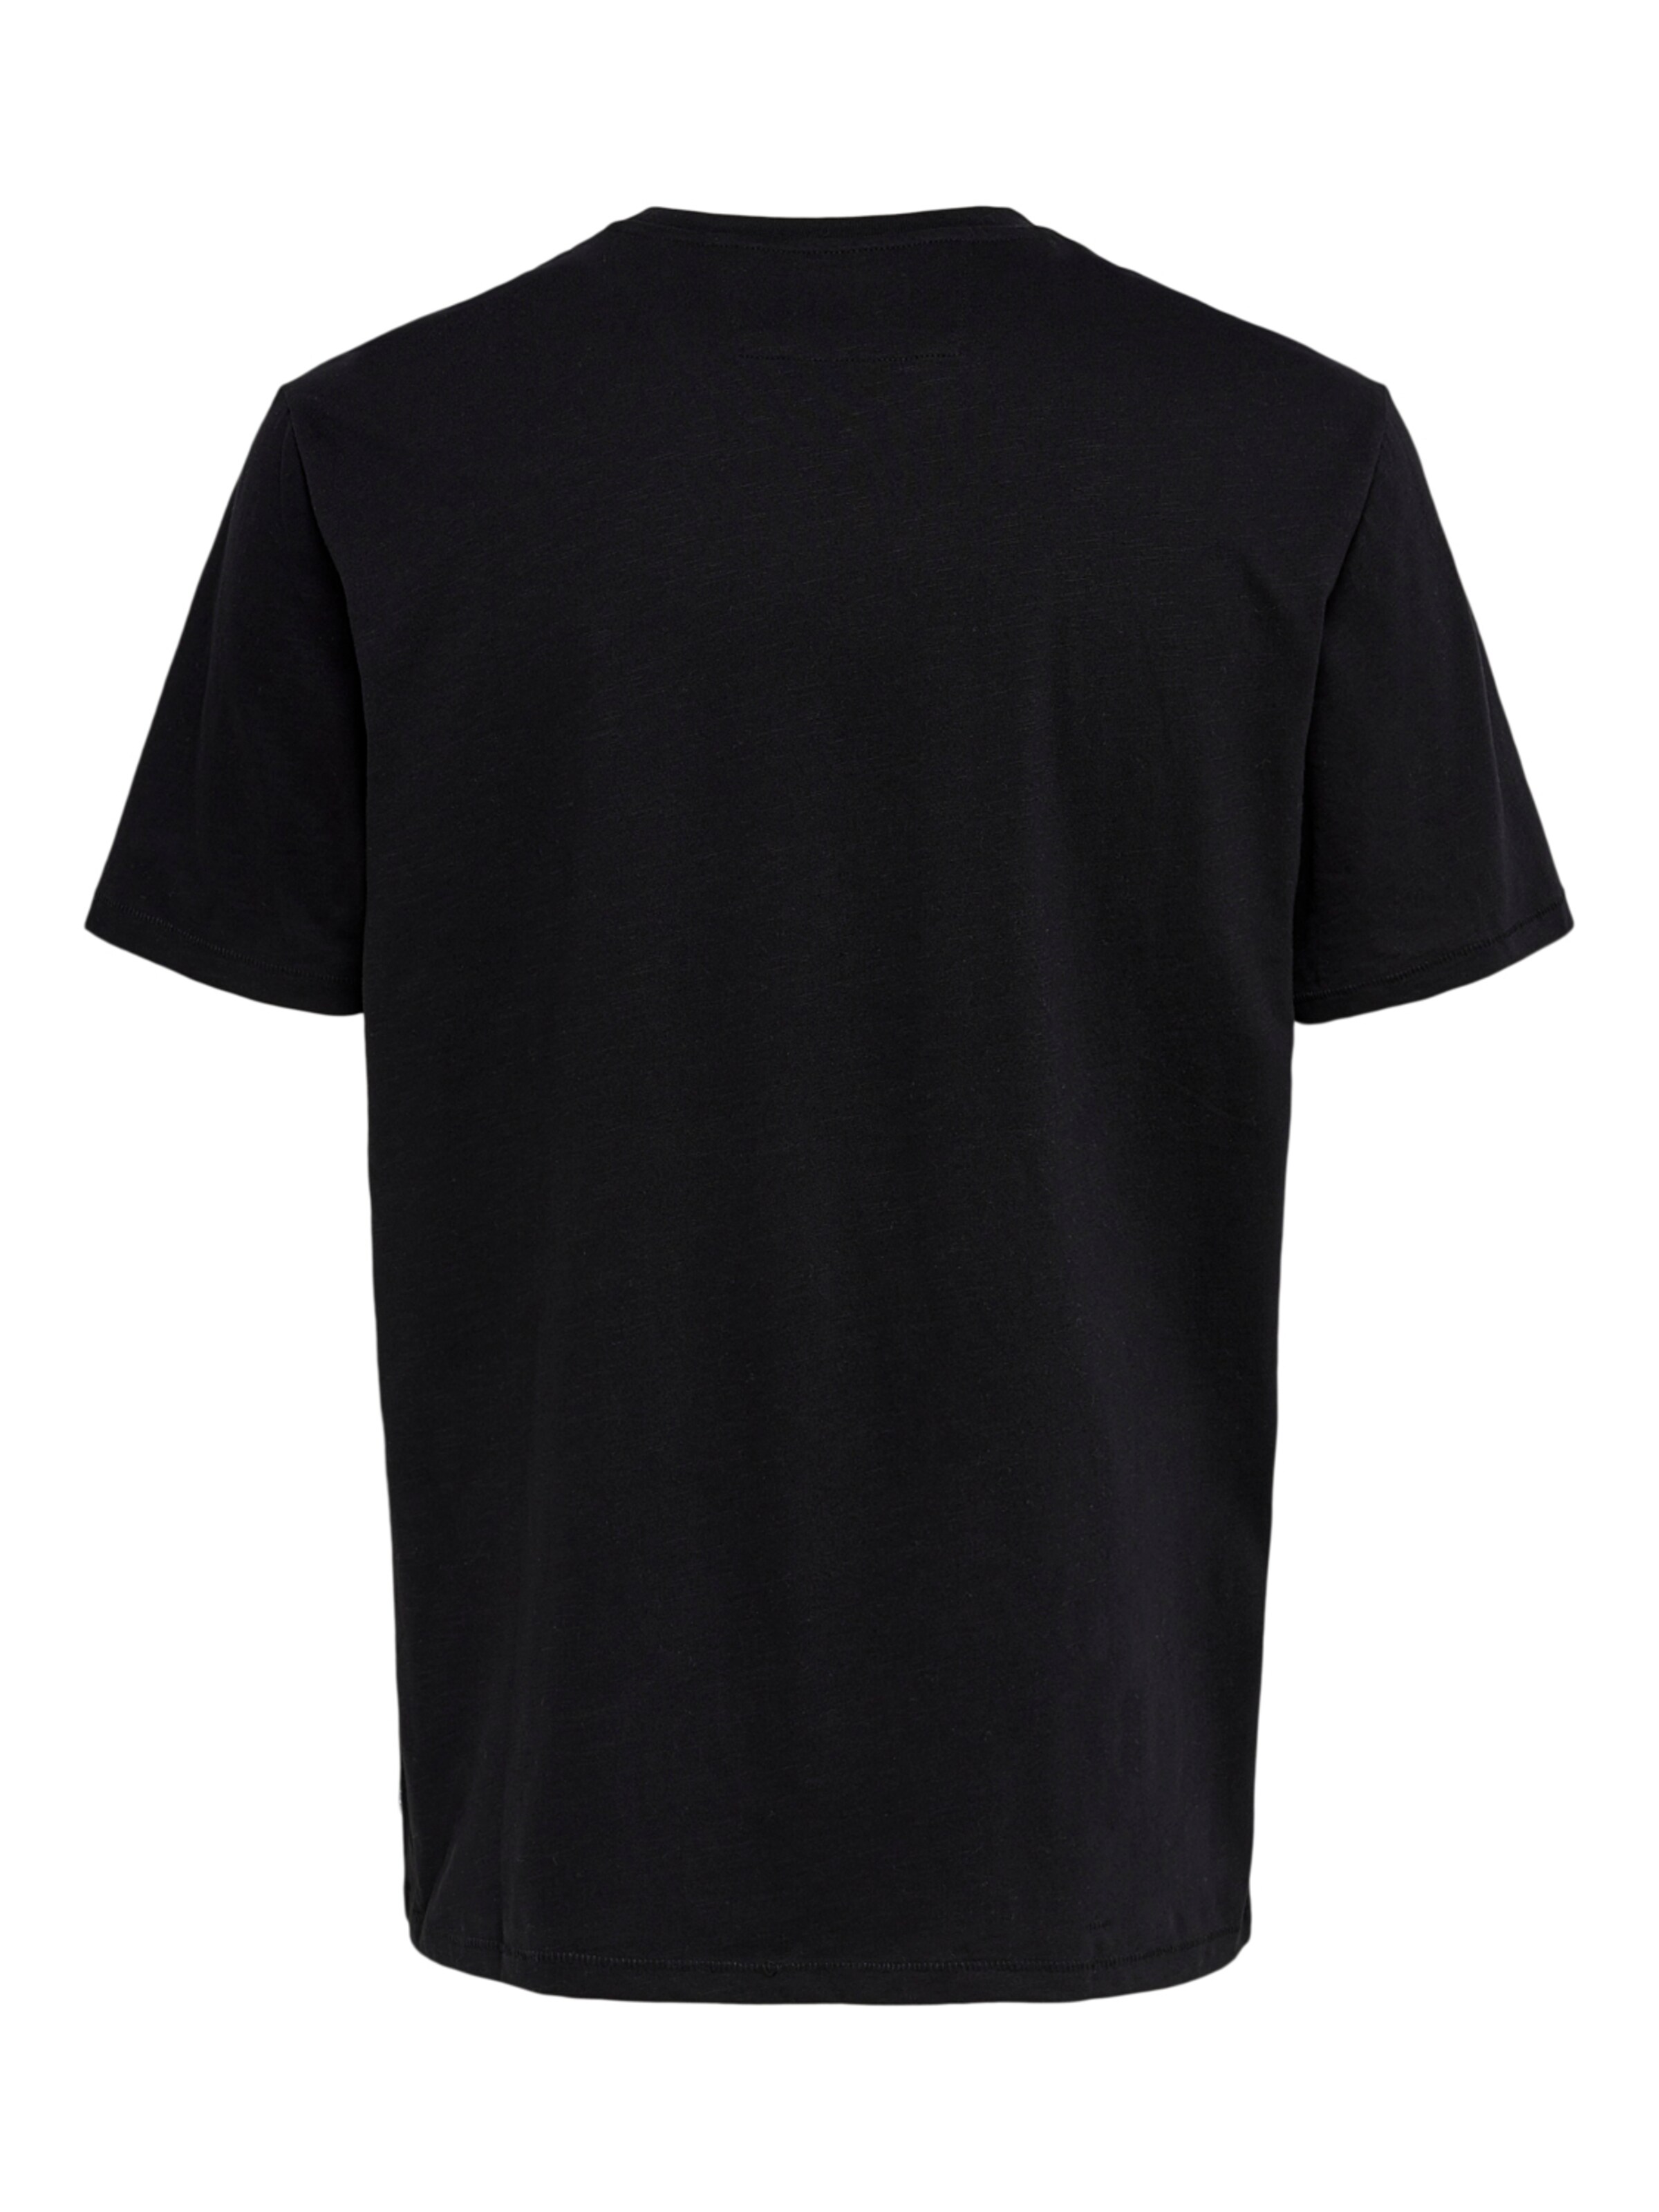 Men T-shirts | Only & Sons Shirt in Black - ZH62014